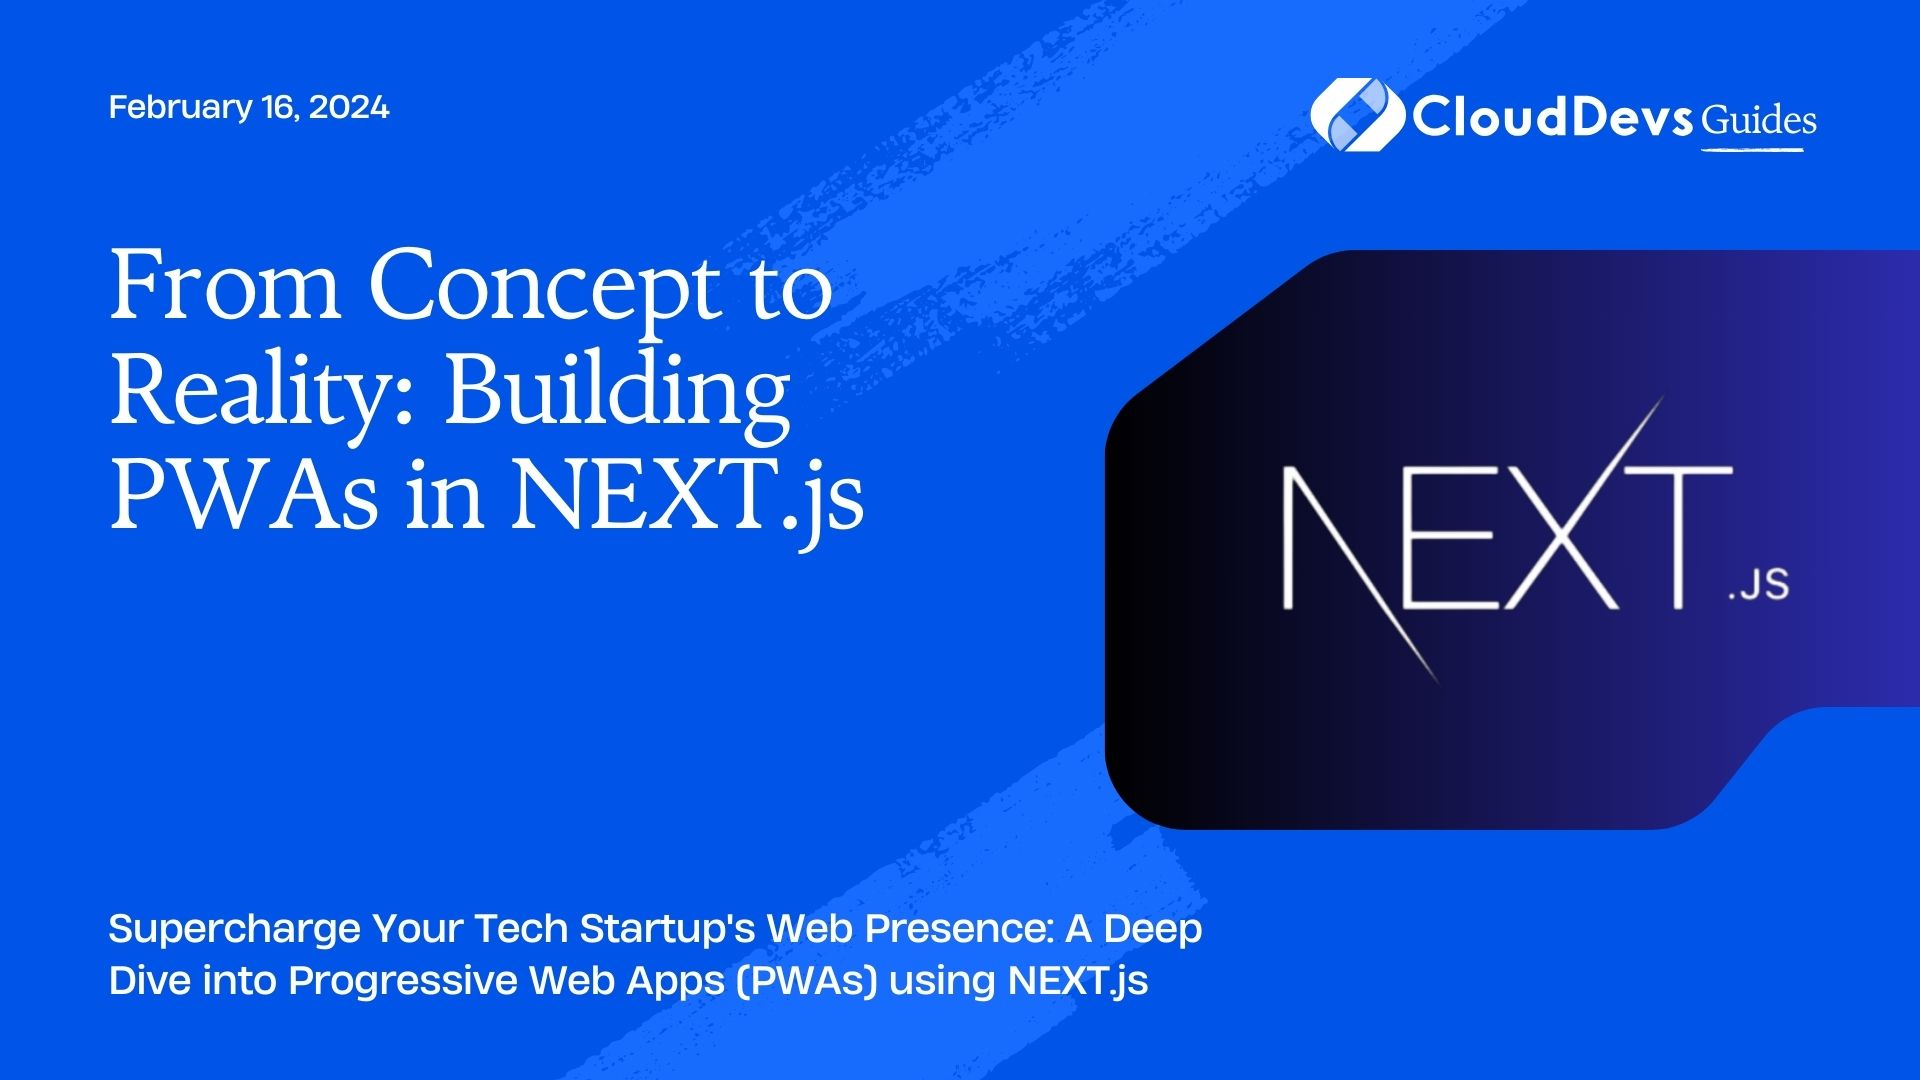 From Concept to Reality: Building PWAs in NEXT.js